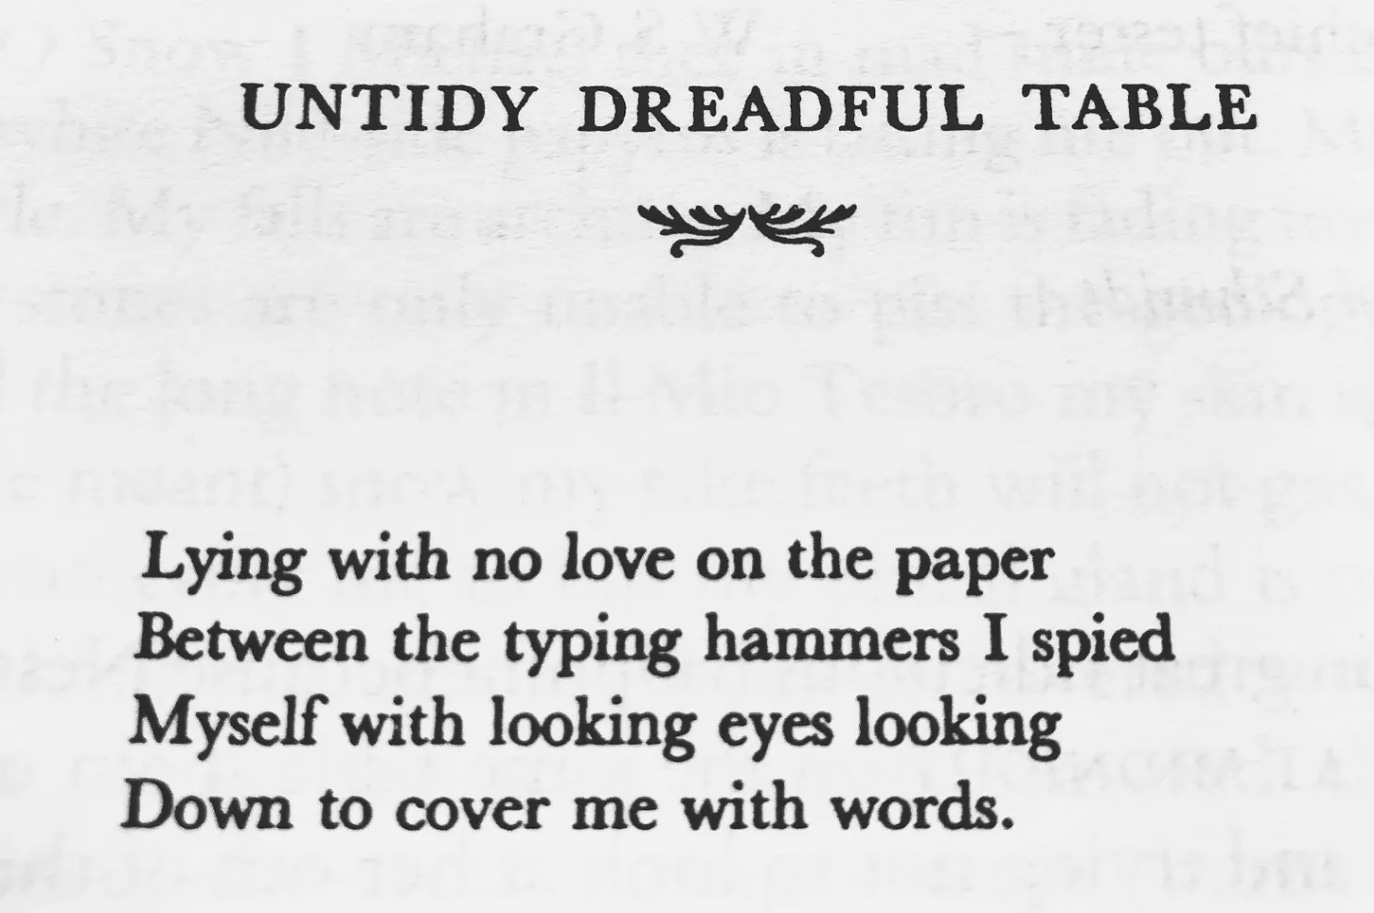 W.S. Graham, UNTIDY DREADFUL TABLE: "Lying with no love on the paper / Between the typing hammers I spied / Myself with looking eyes looking / Down to cover me with words."